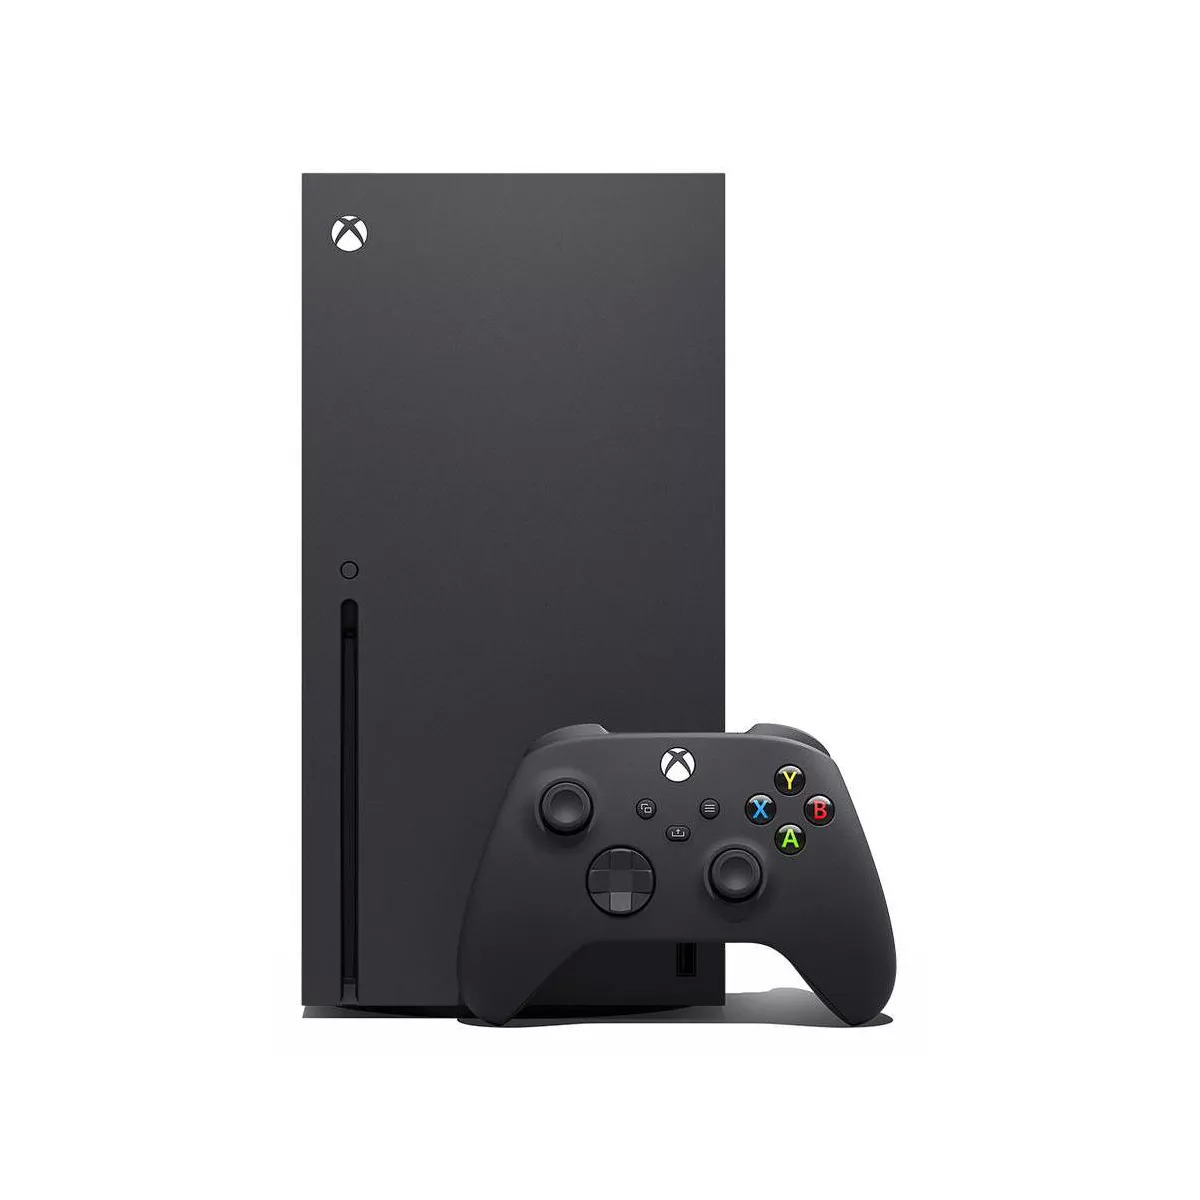 Xbox series x Target 10 percent off and free game with purchase 69.99 and under